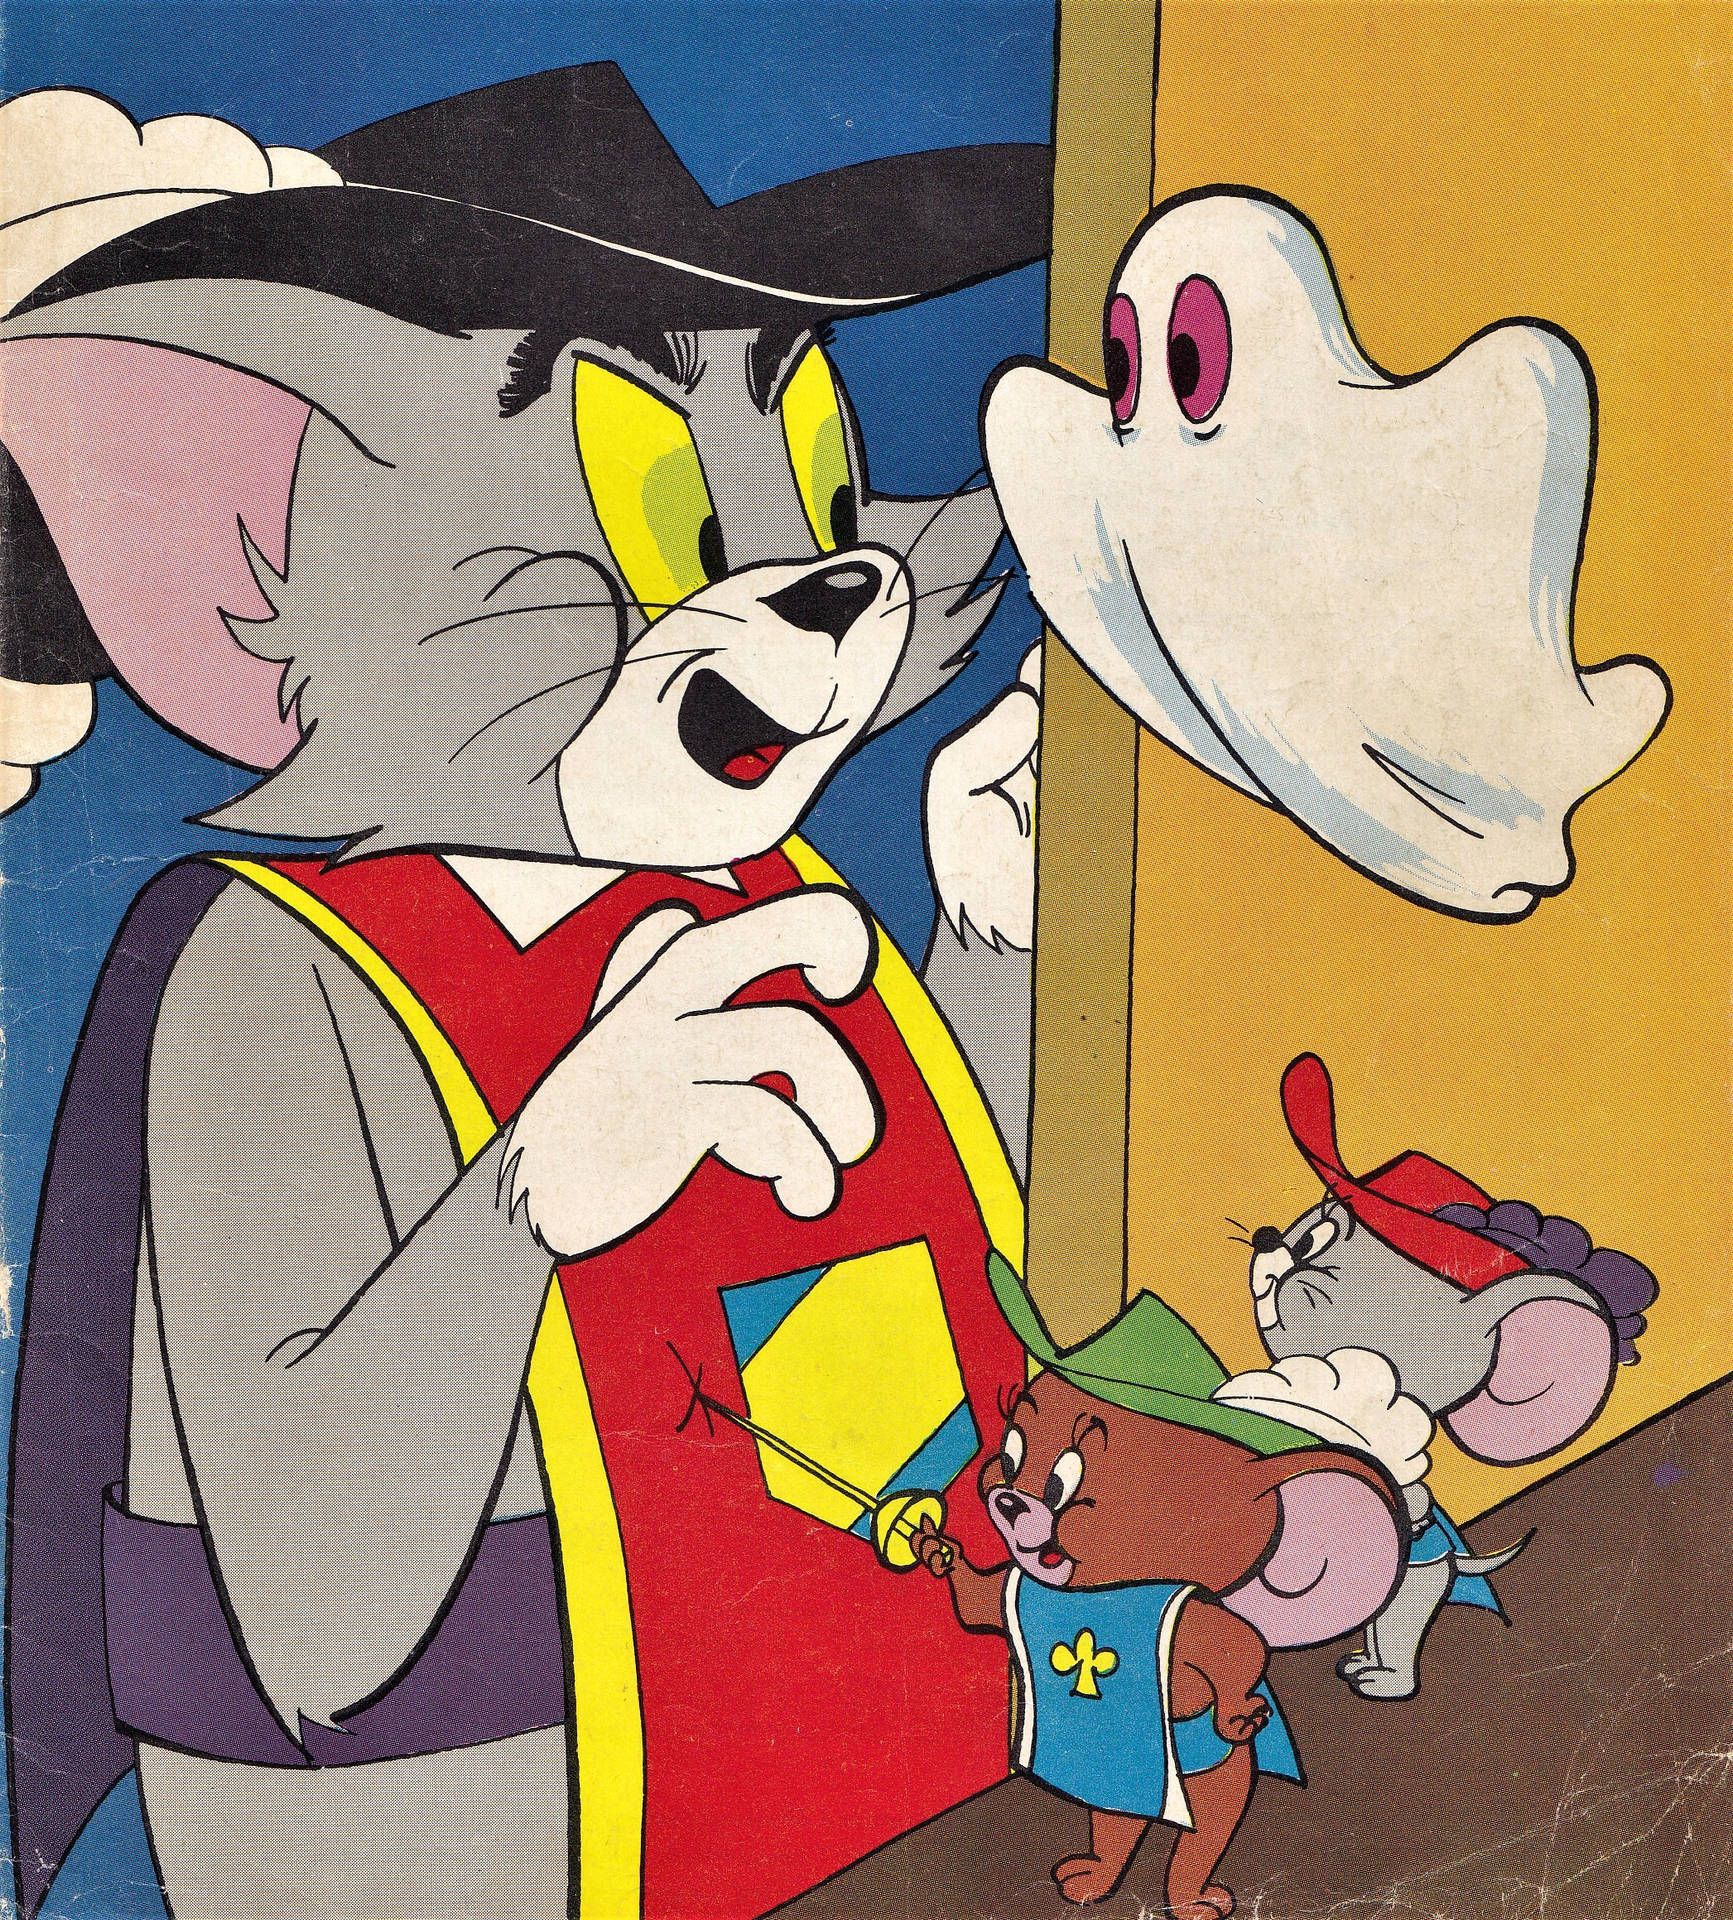 Download The Scary Ghost From Tom and Jerry Aesthetic Wallpaper